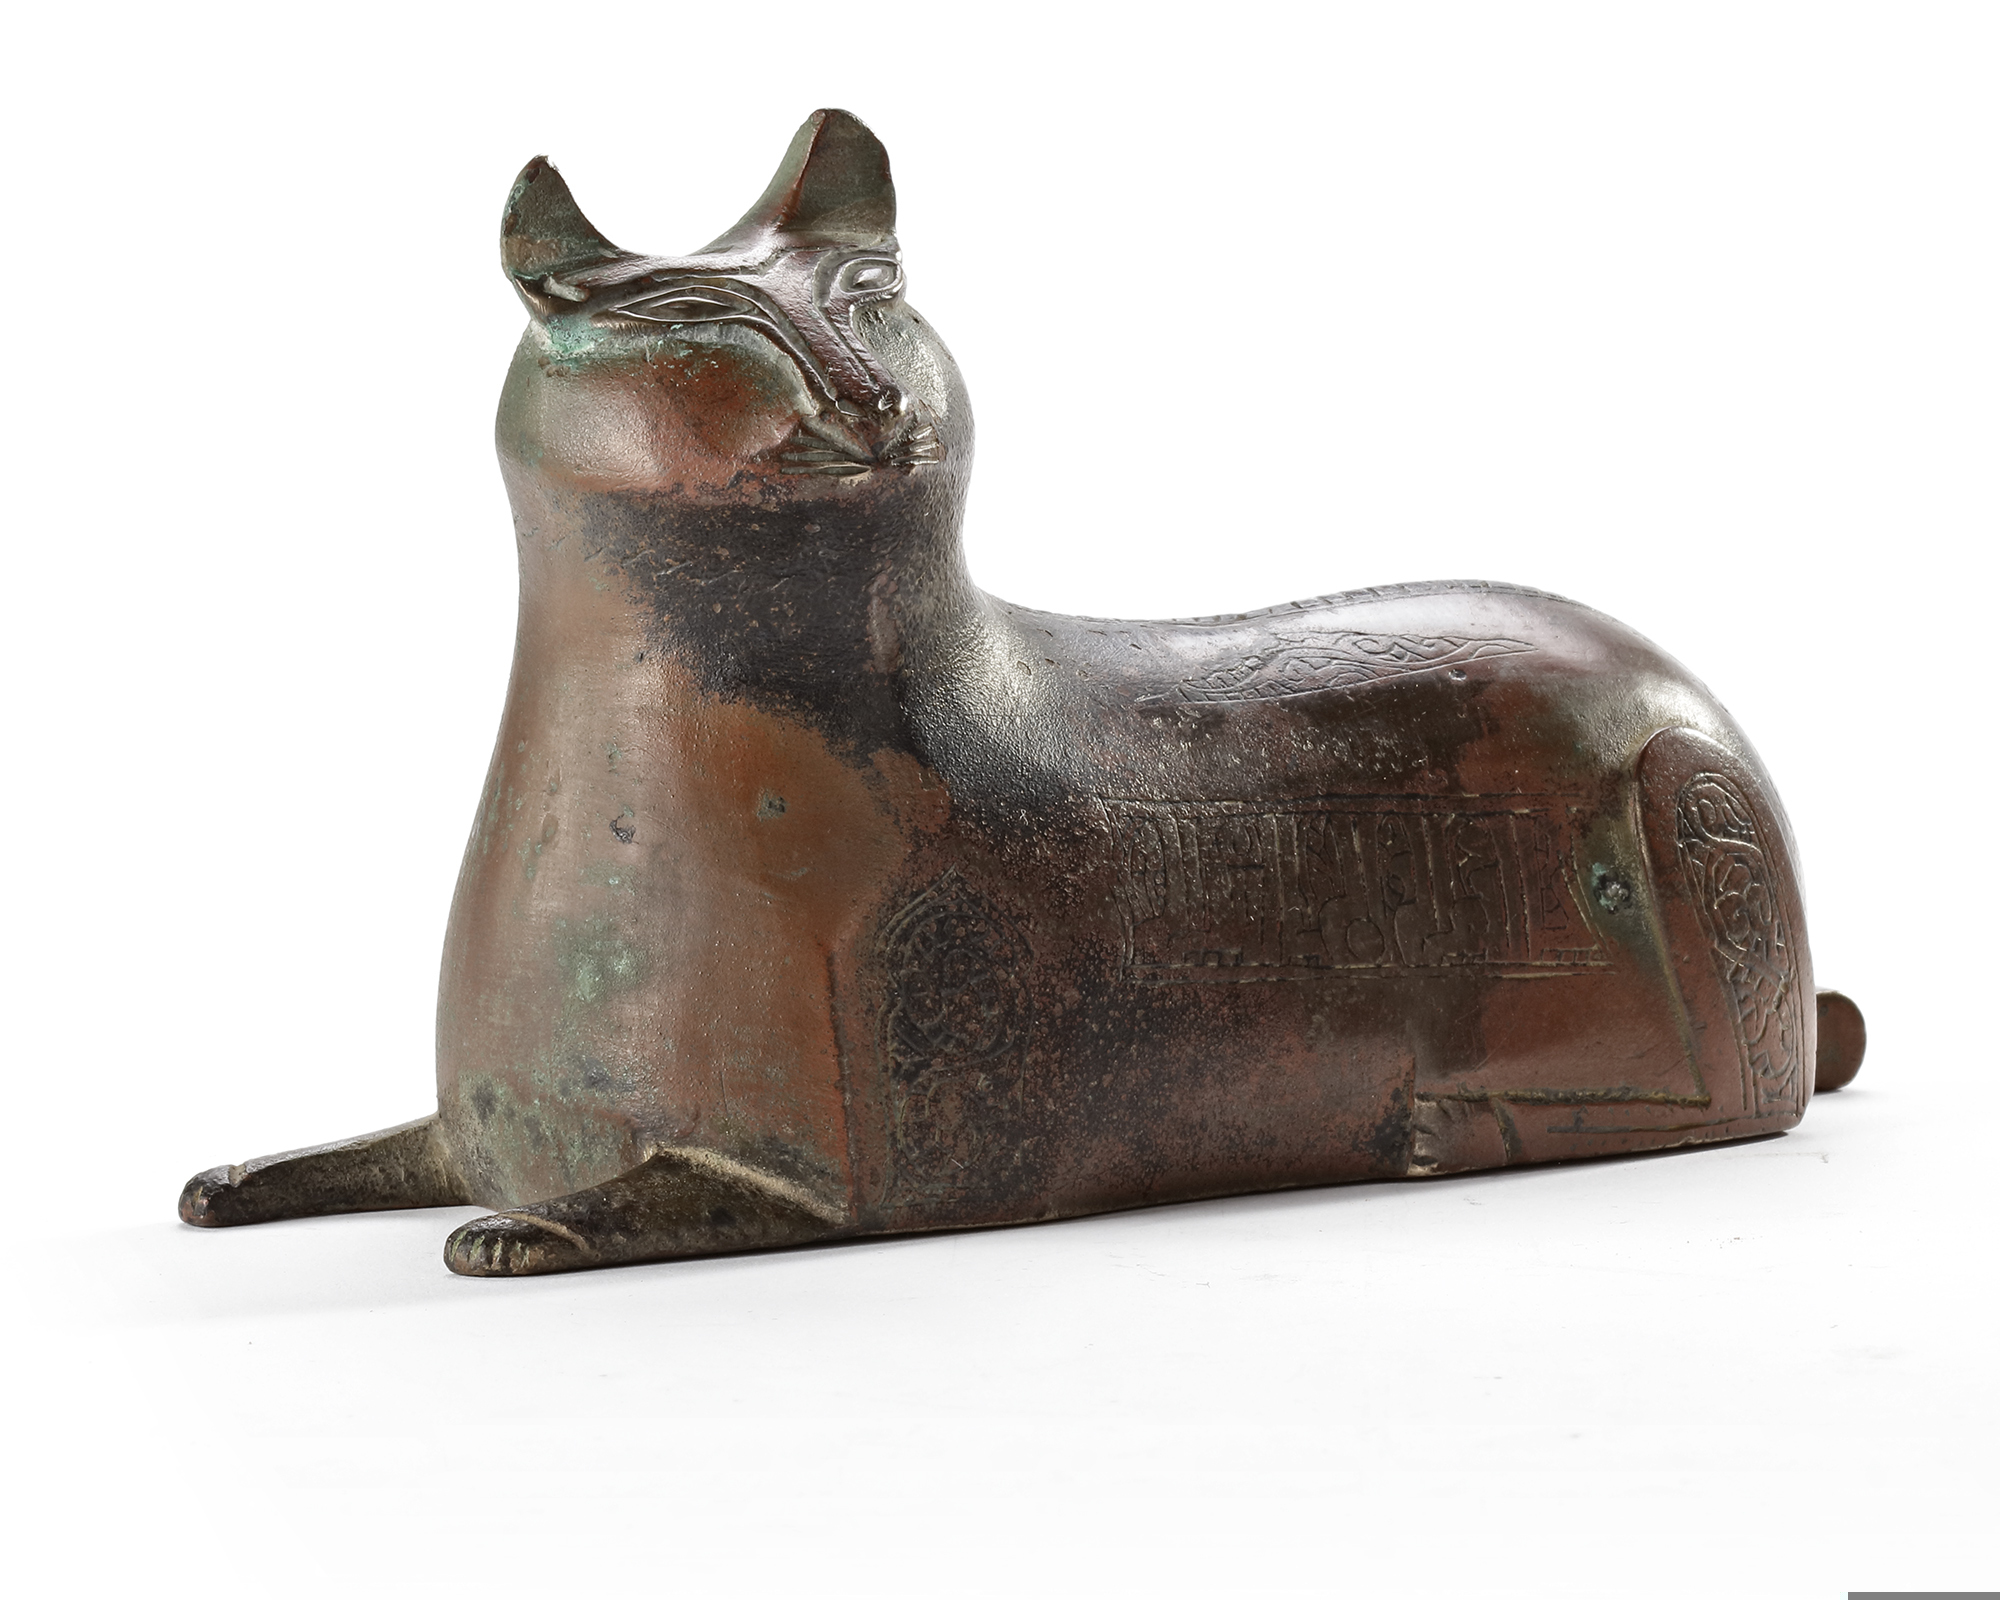 A KHORASAN BRONZE WEIGHT FIGURINE IN THE FORM OF A LION, PERSIA, 12TH CENTURY - Image 4 of 8